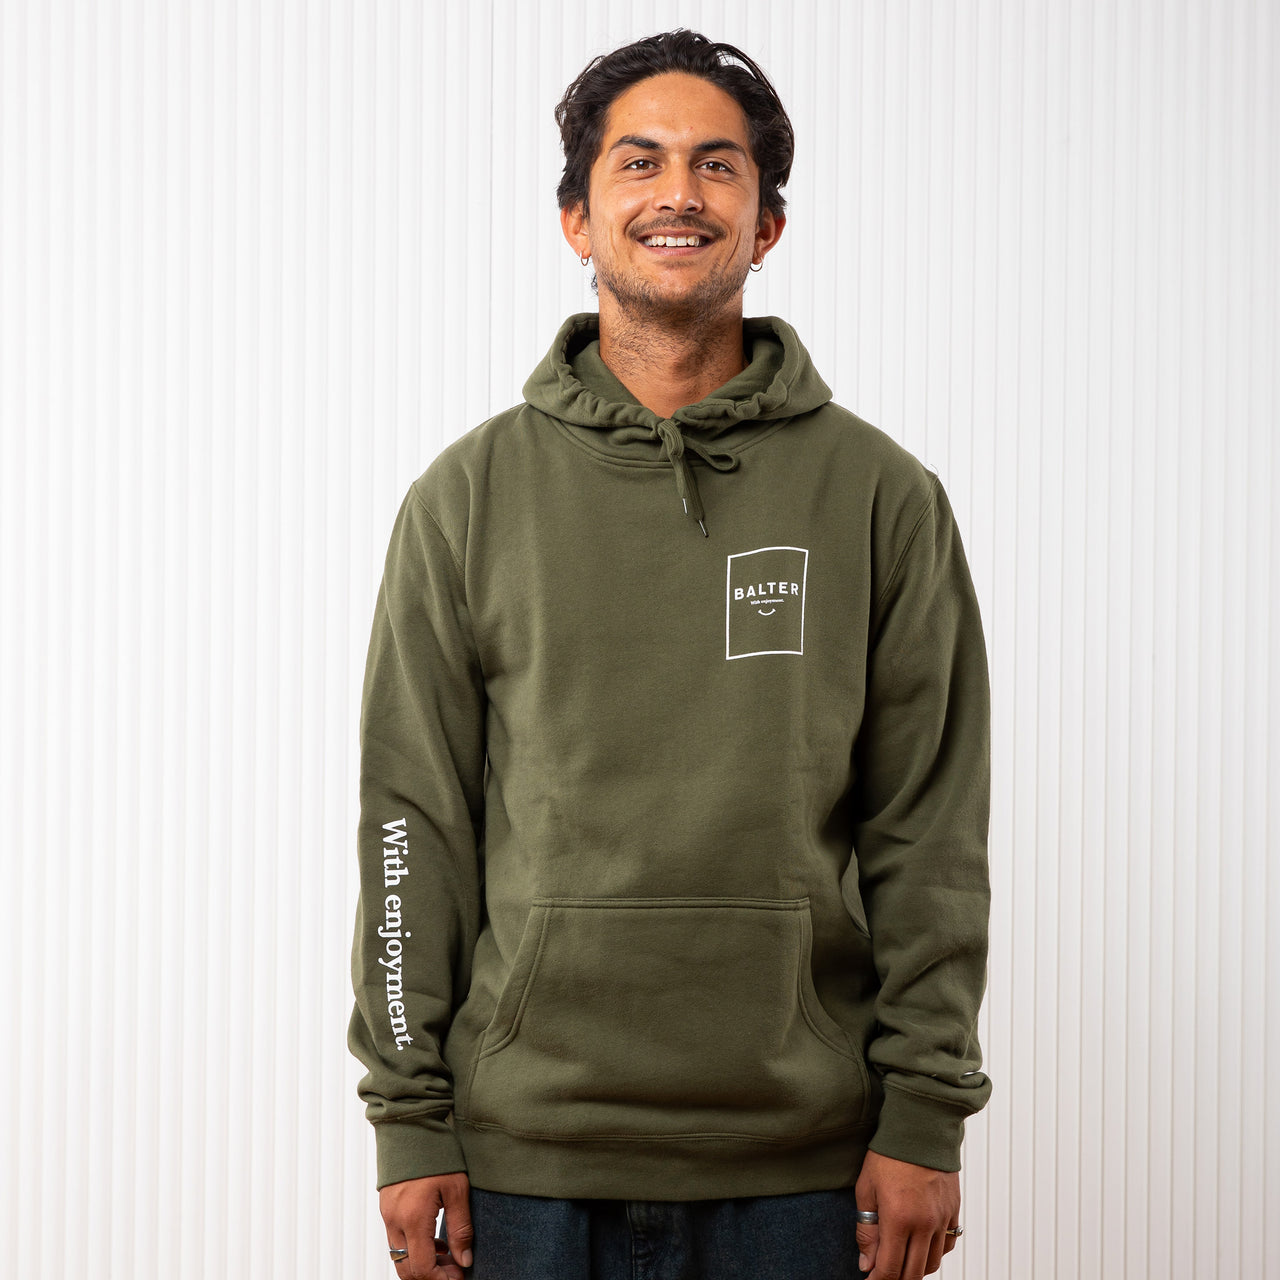 Balter With Enjoyment Hoodie - Army